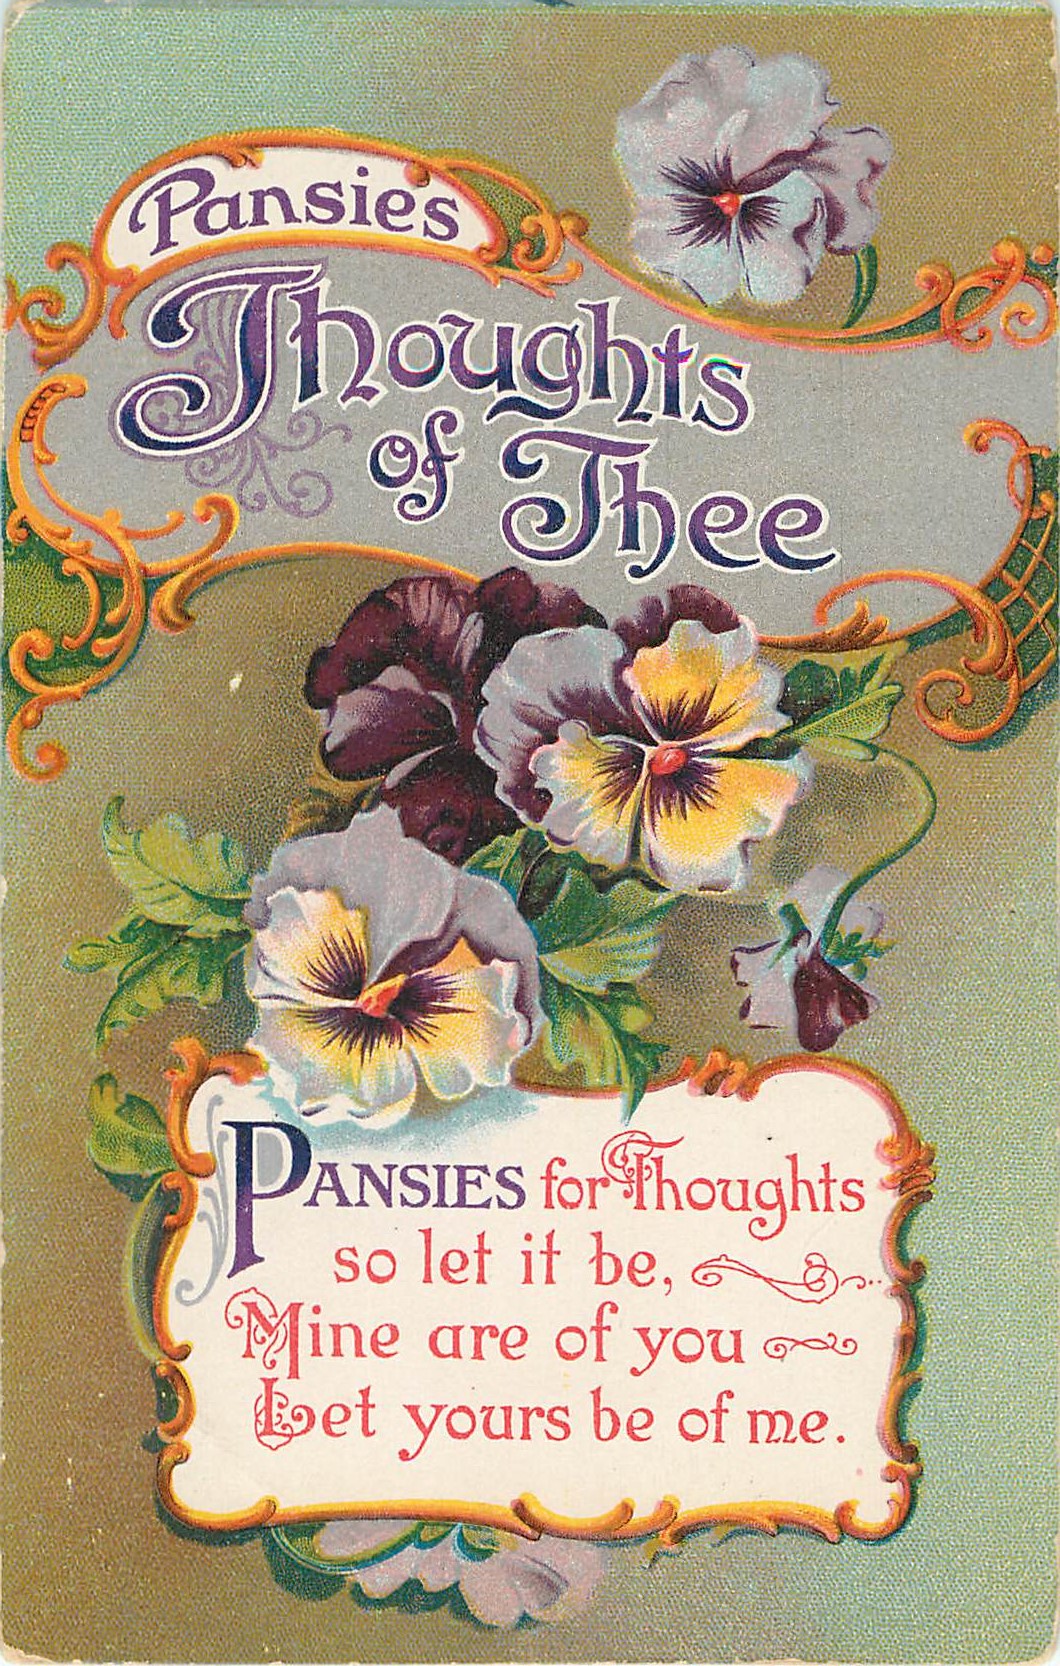 Pansies Thoughts of Thee